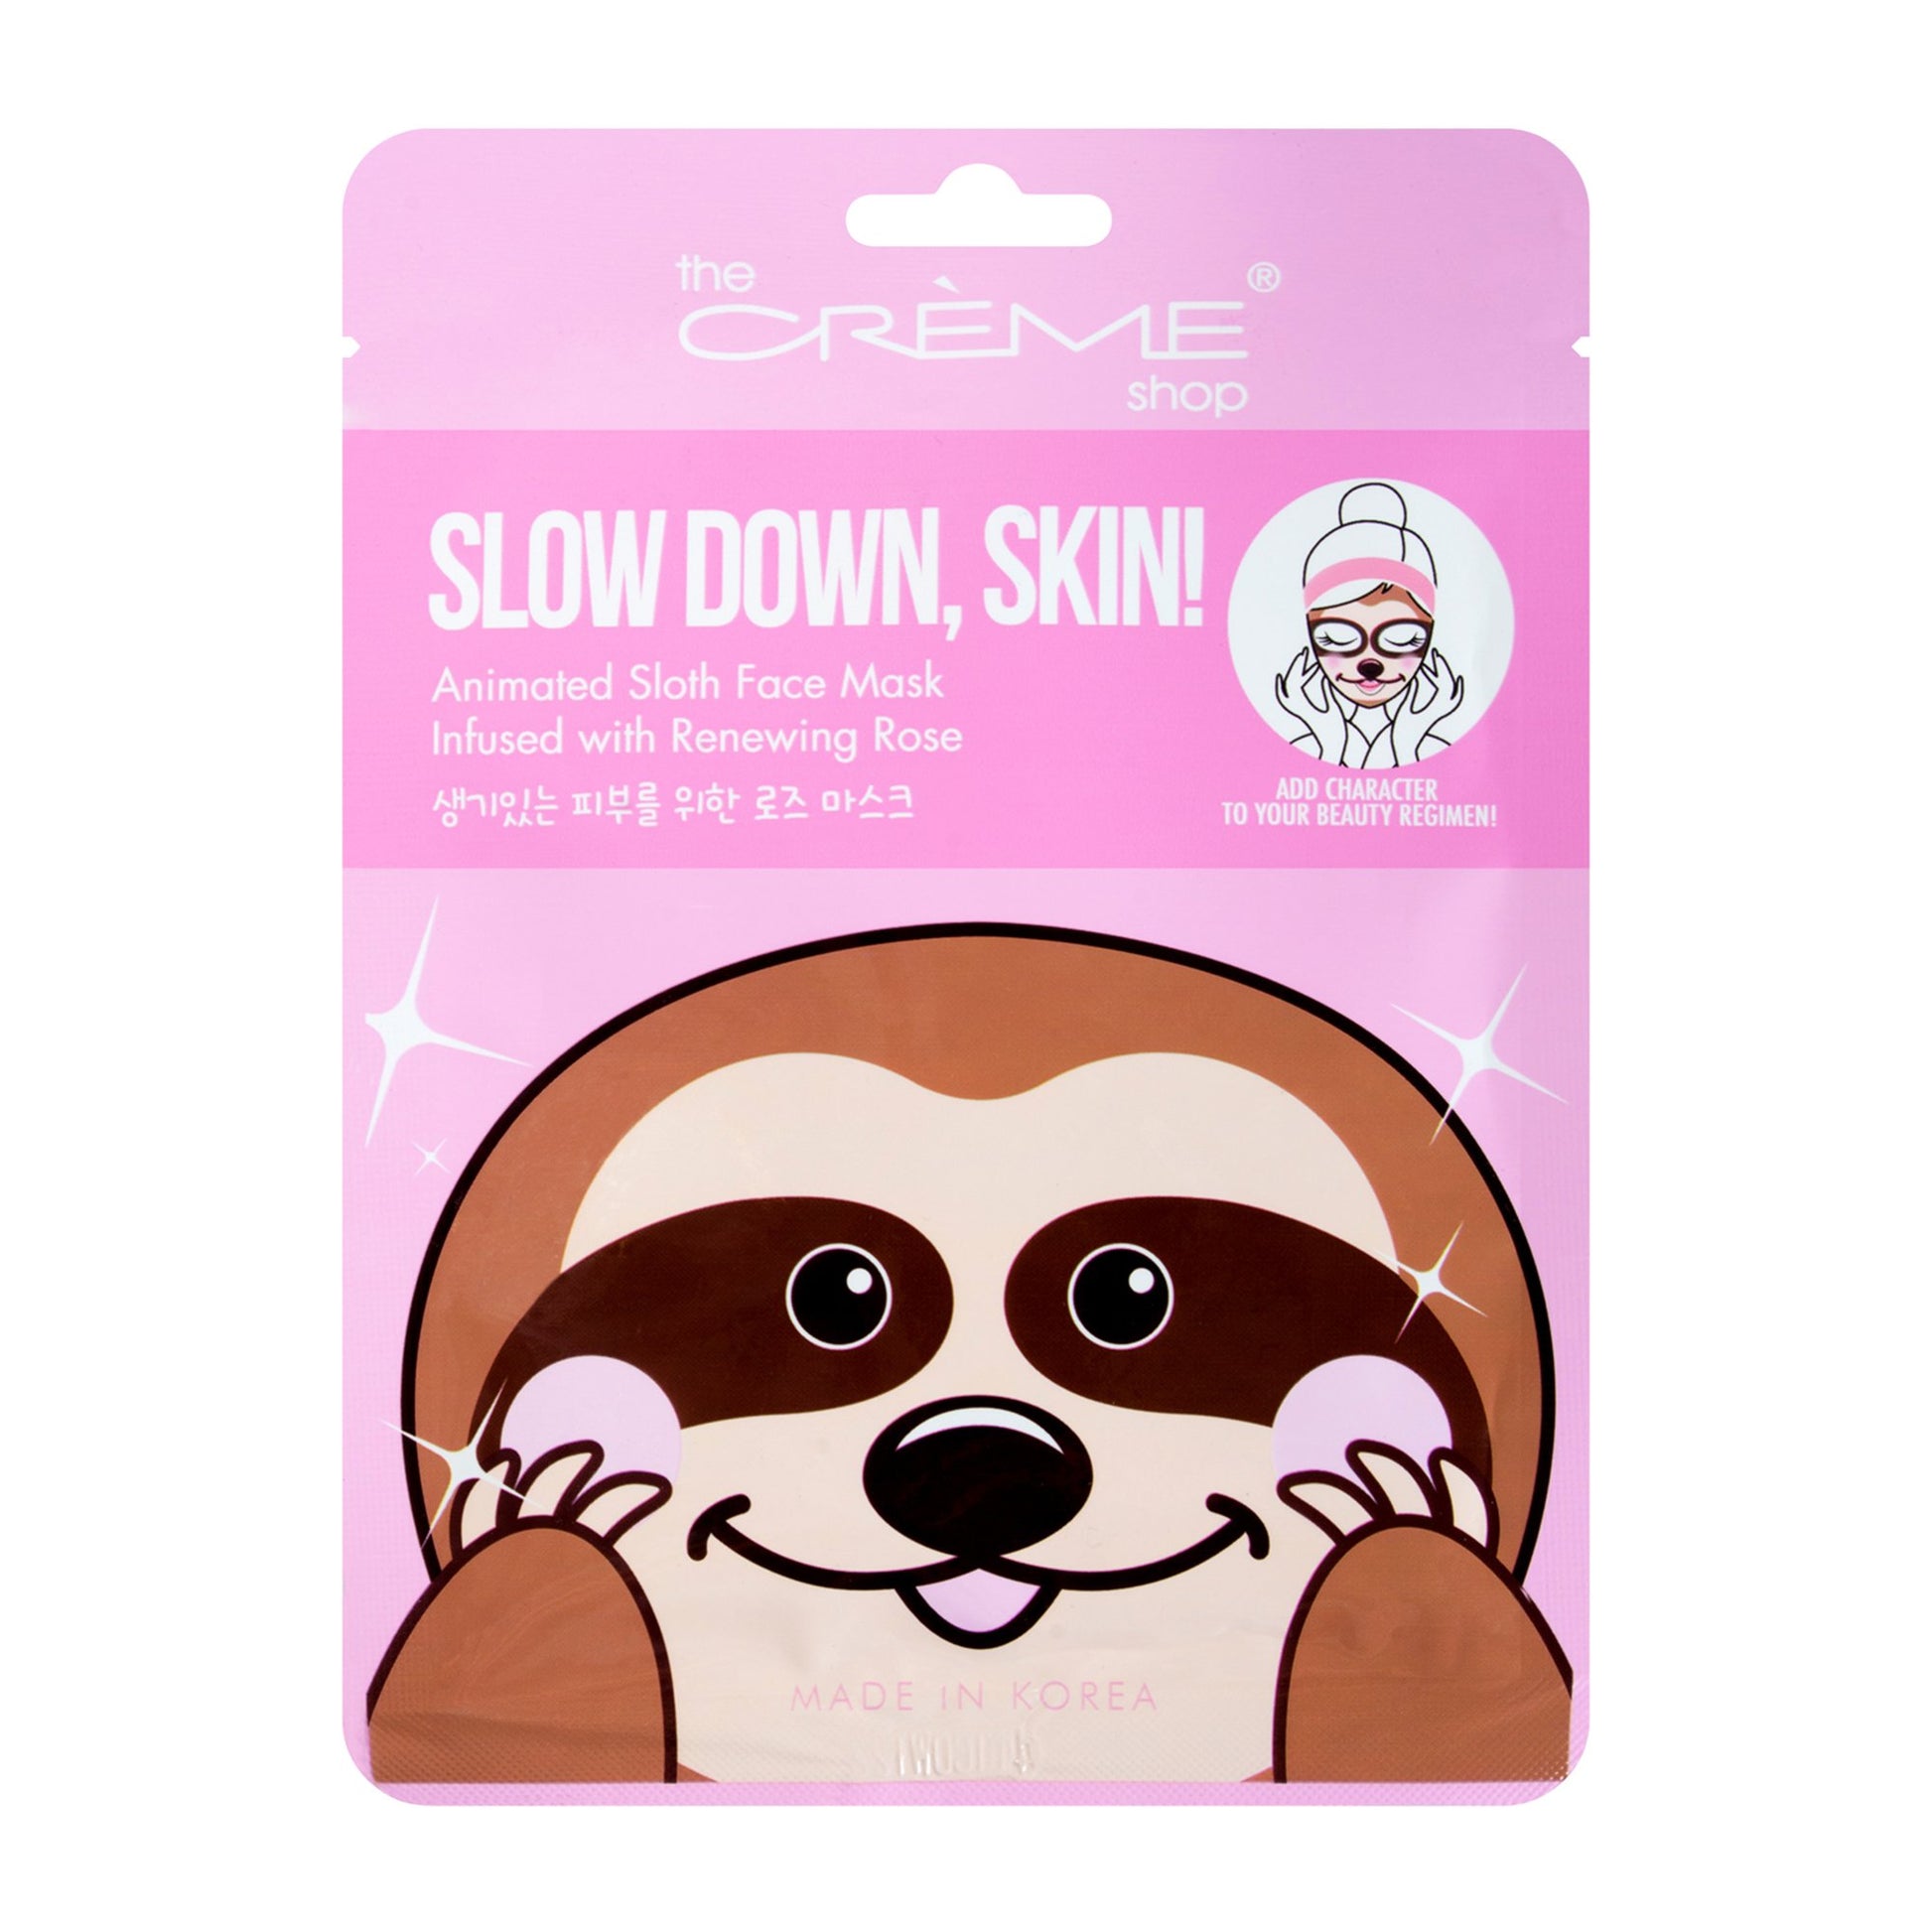 Slow Down, Skin! Animated Sloth Face Mask - Renewing Rose - The Crème Shop